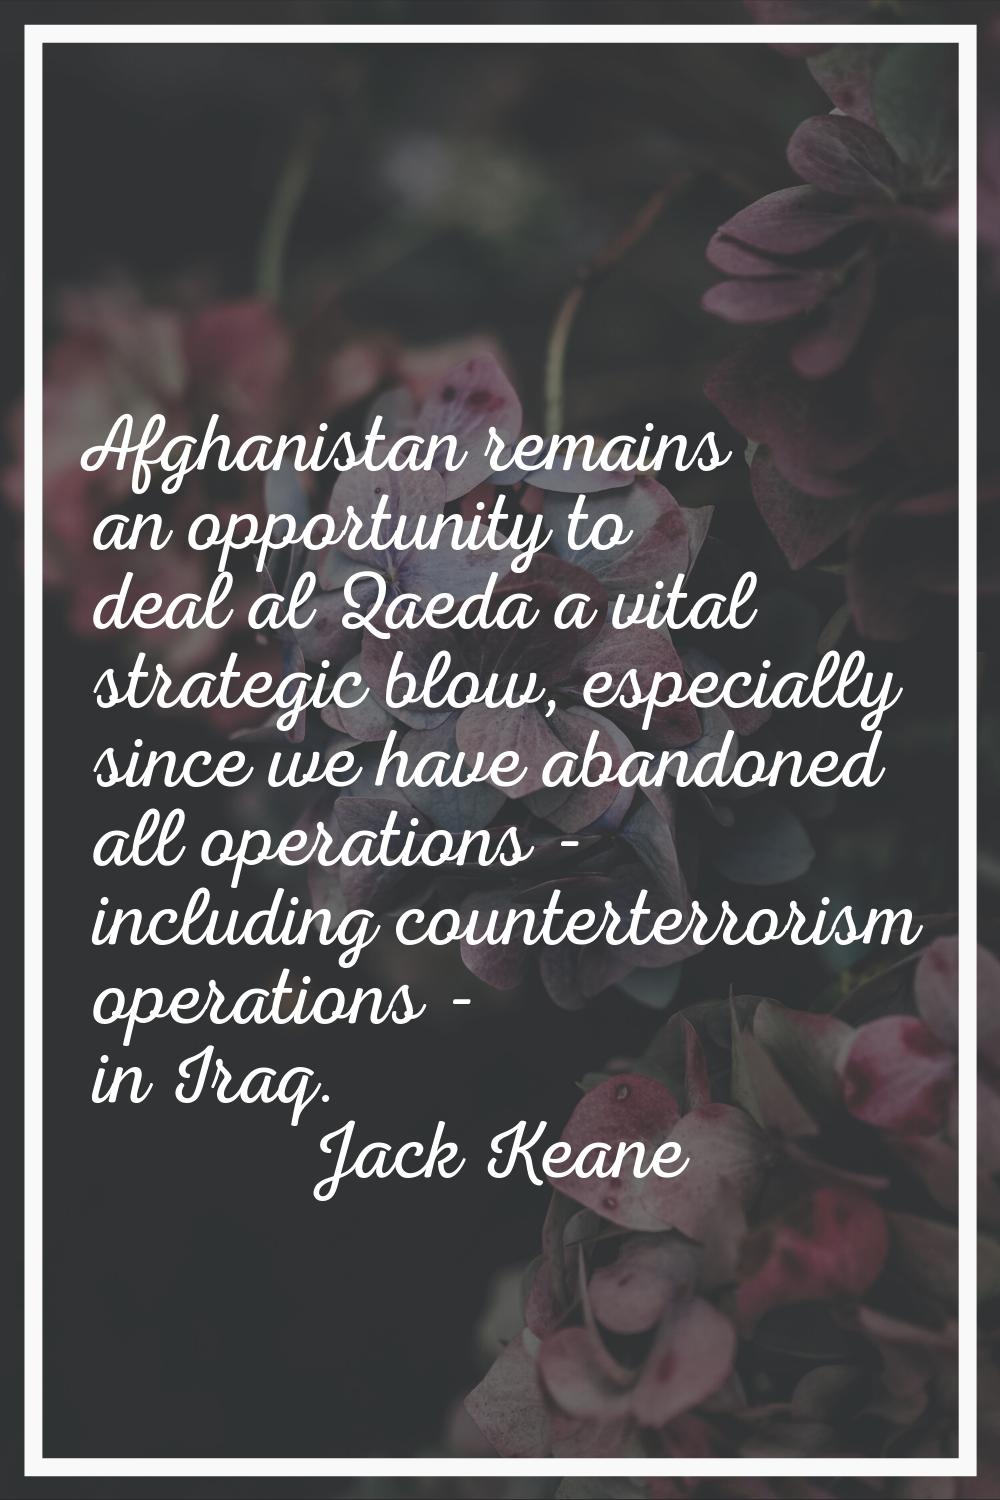 Afghanistan remains an opportunity to deal al Qaeda a vital strategic blow, especially since we hav